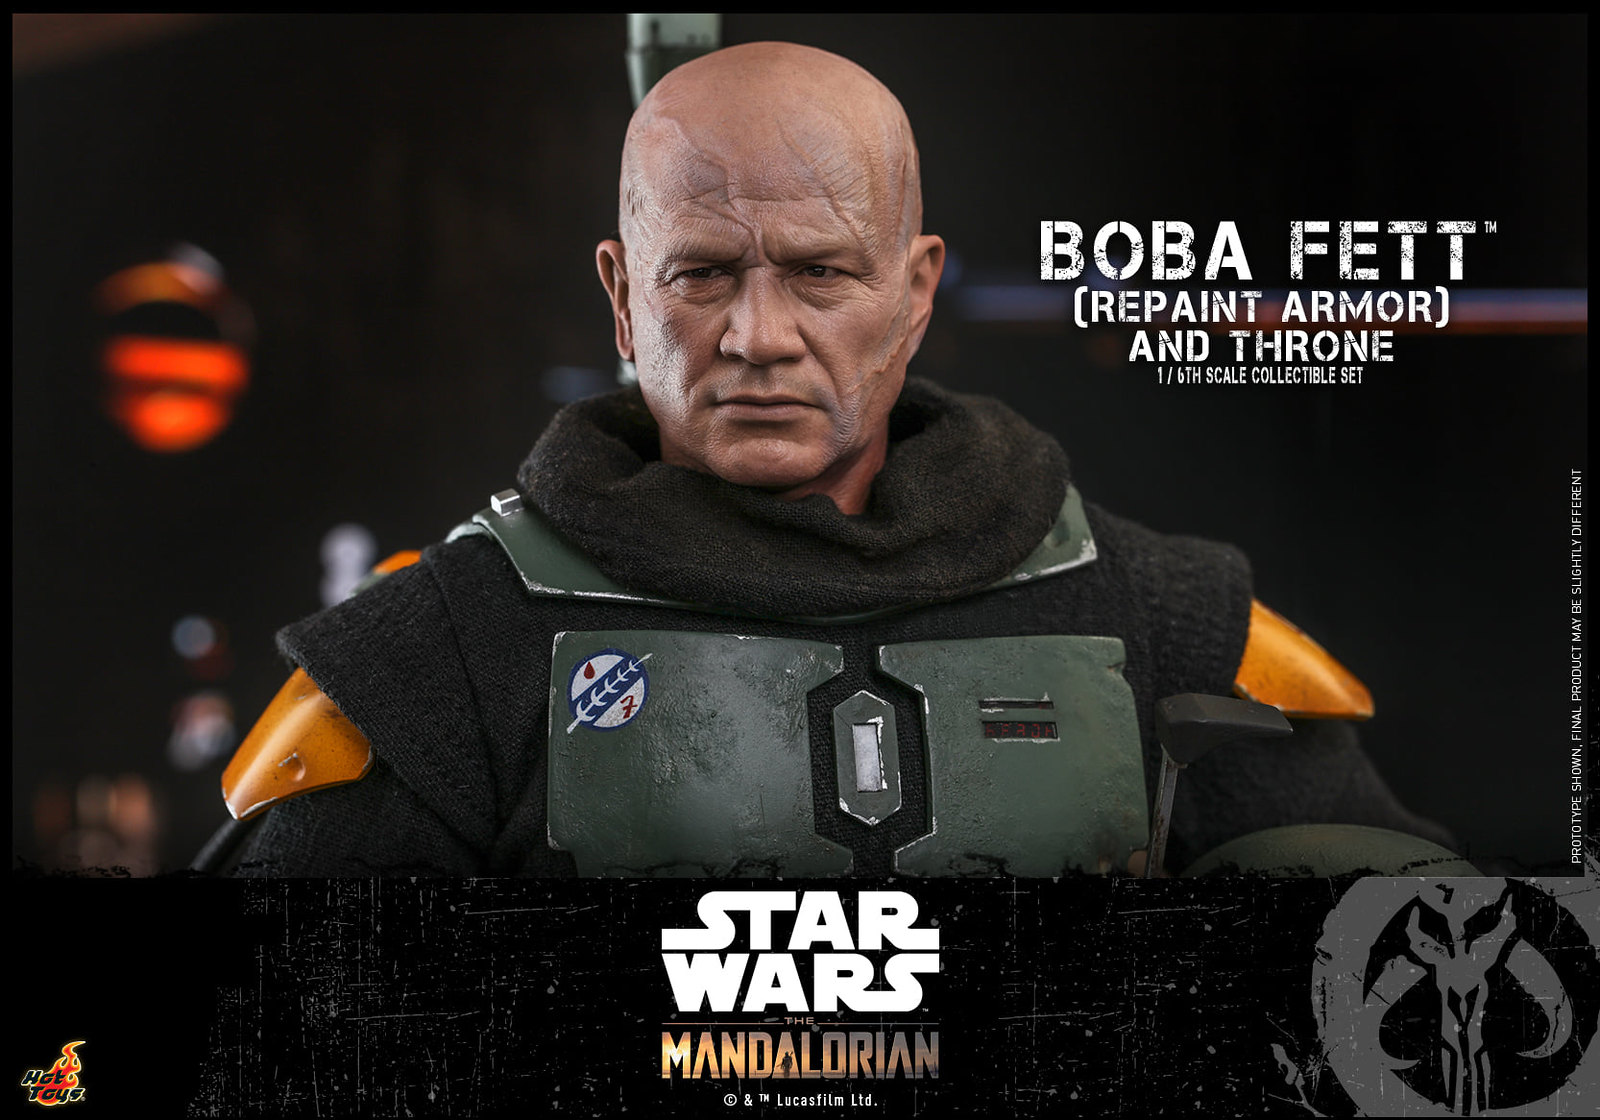 Star Wars: The Mandalorian™ - 1/6th scale Boba Fett™ (Repaint Armor) Collectible figure/ figure and Throne Collectible Set 51311297186_9975bc58fe_h